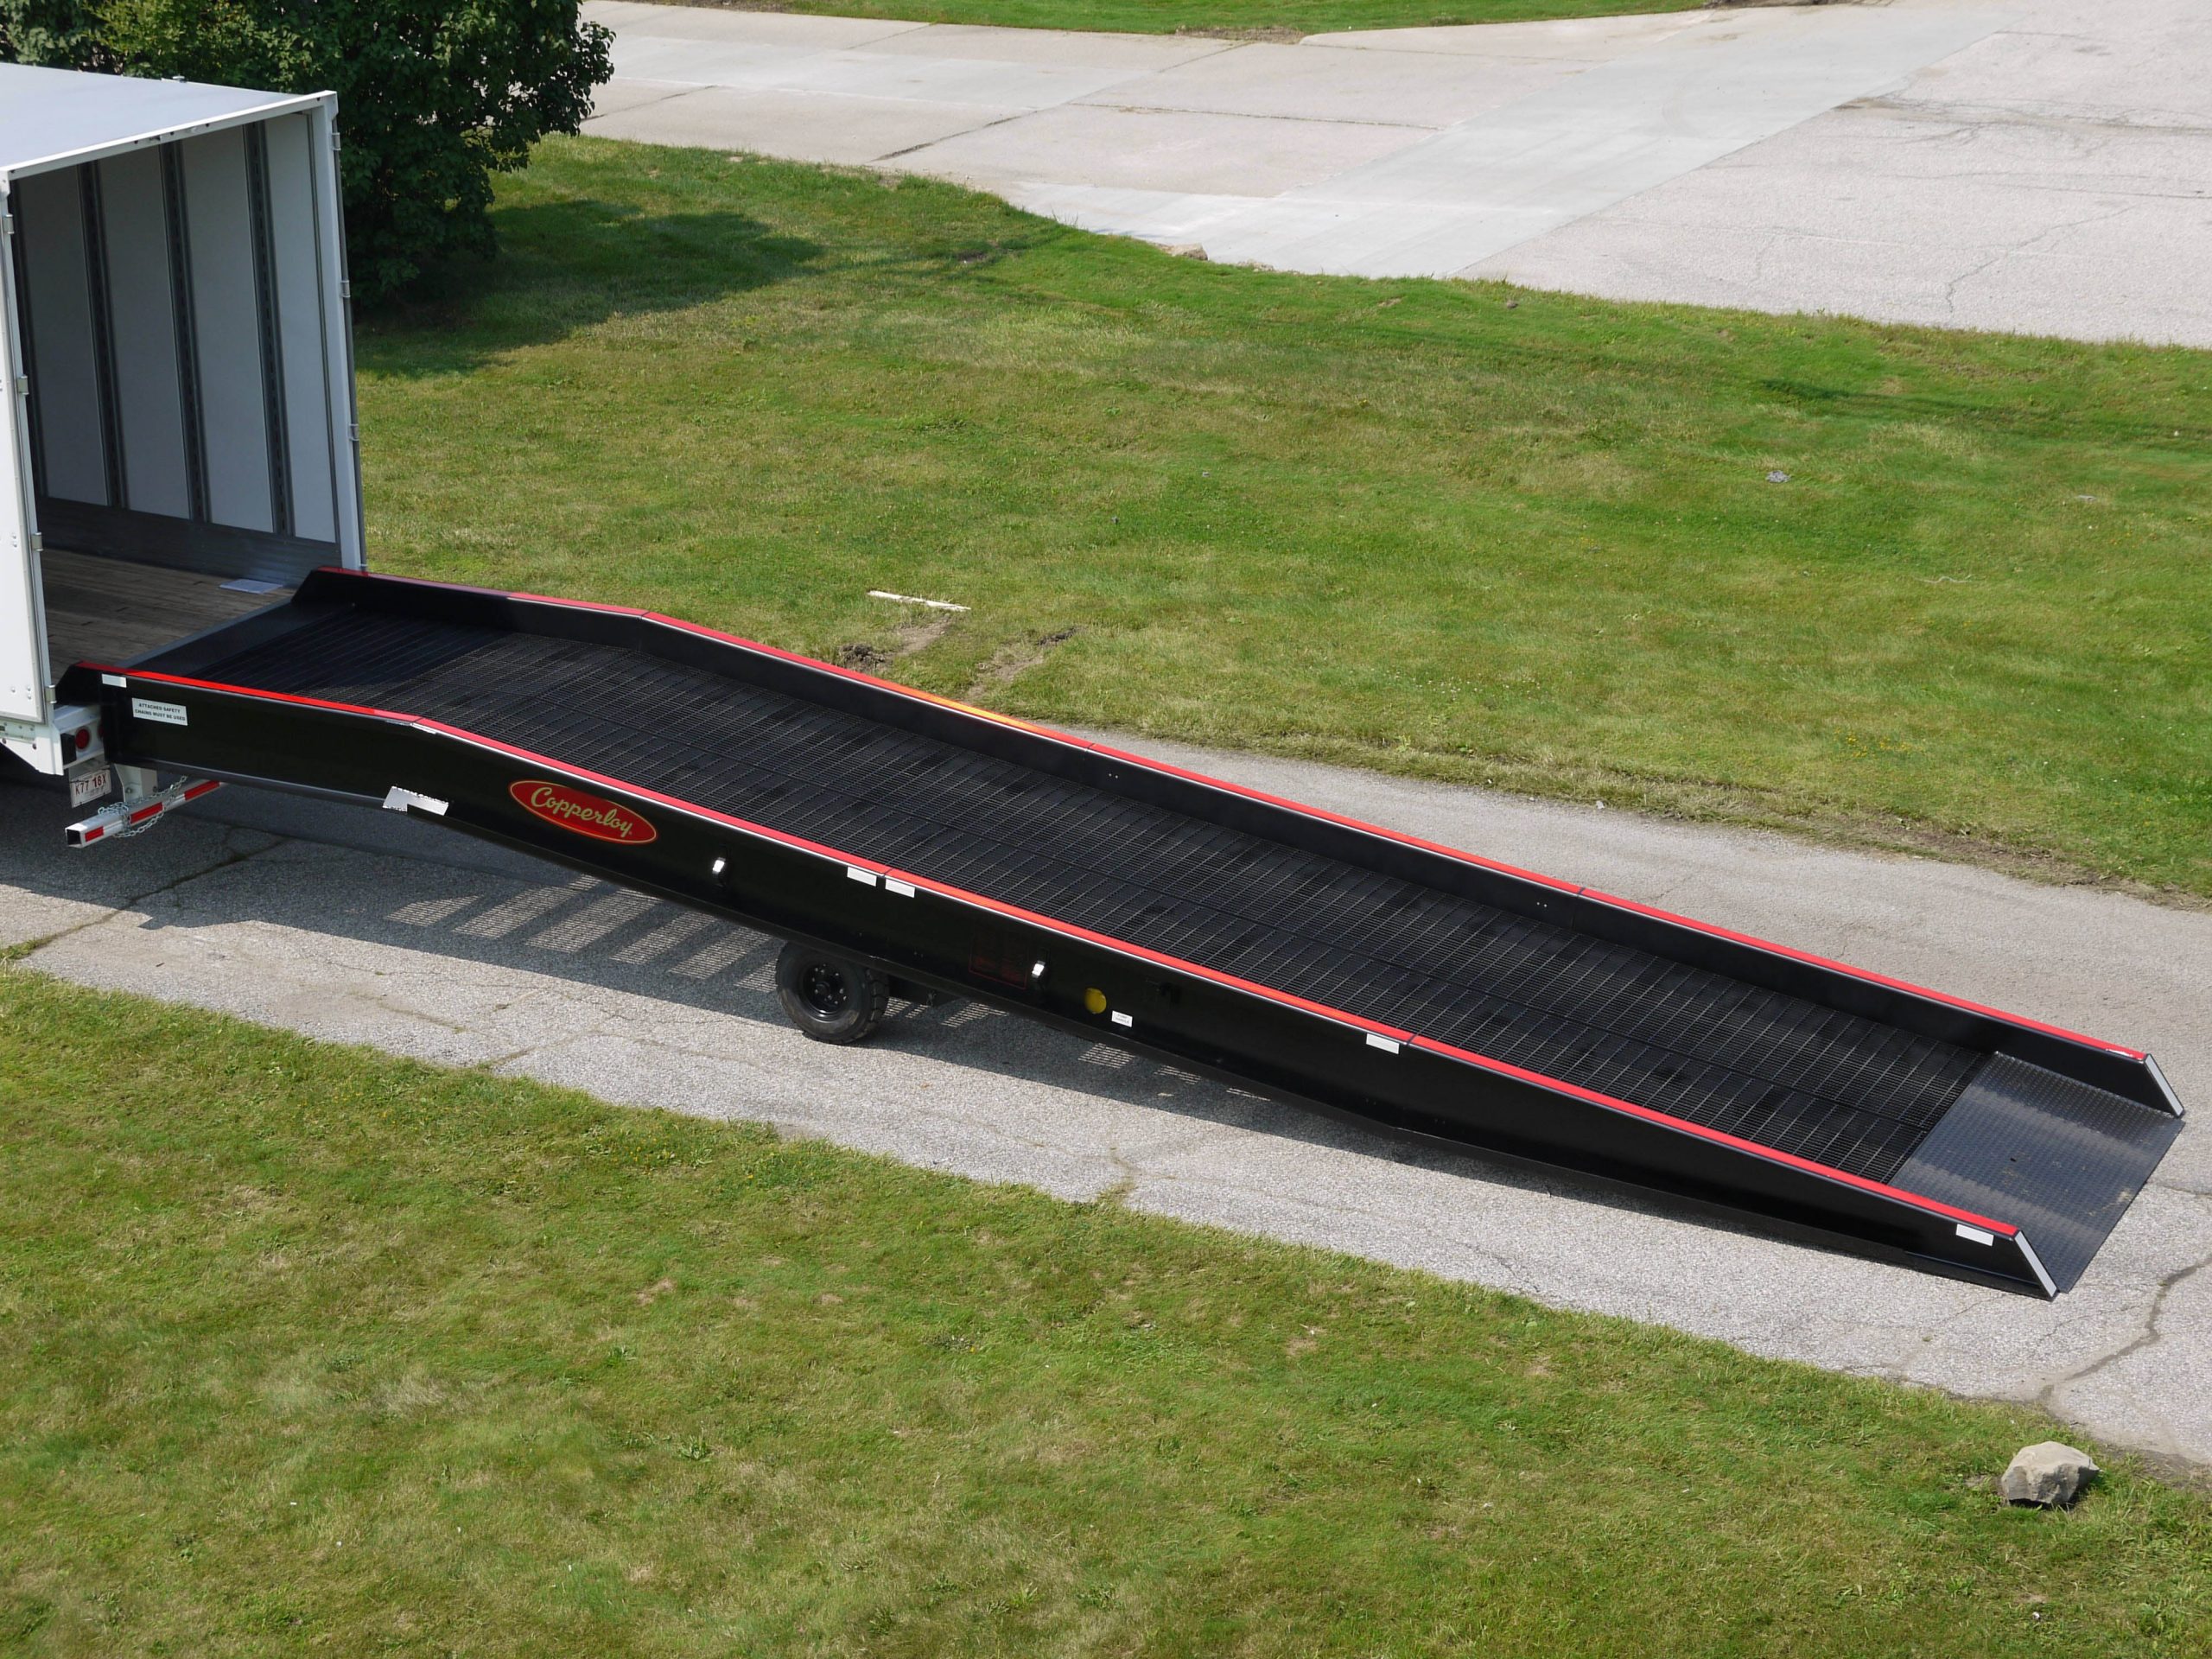 A distant view of one of Copperloy's Yard Ramps connected to a truck.